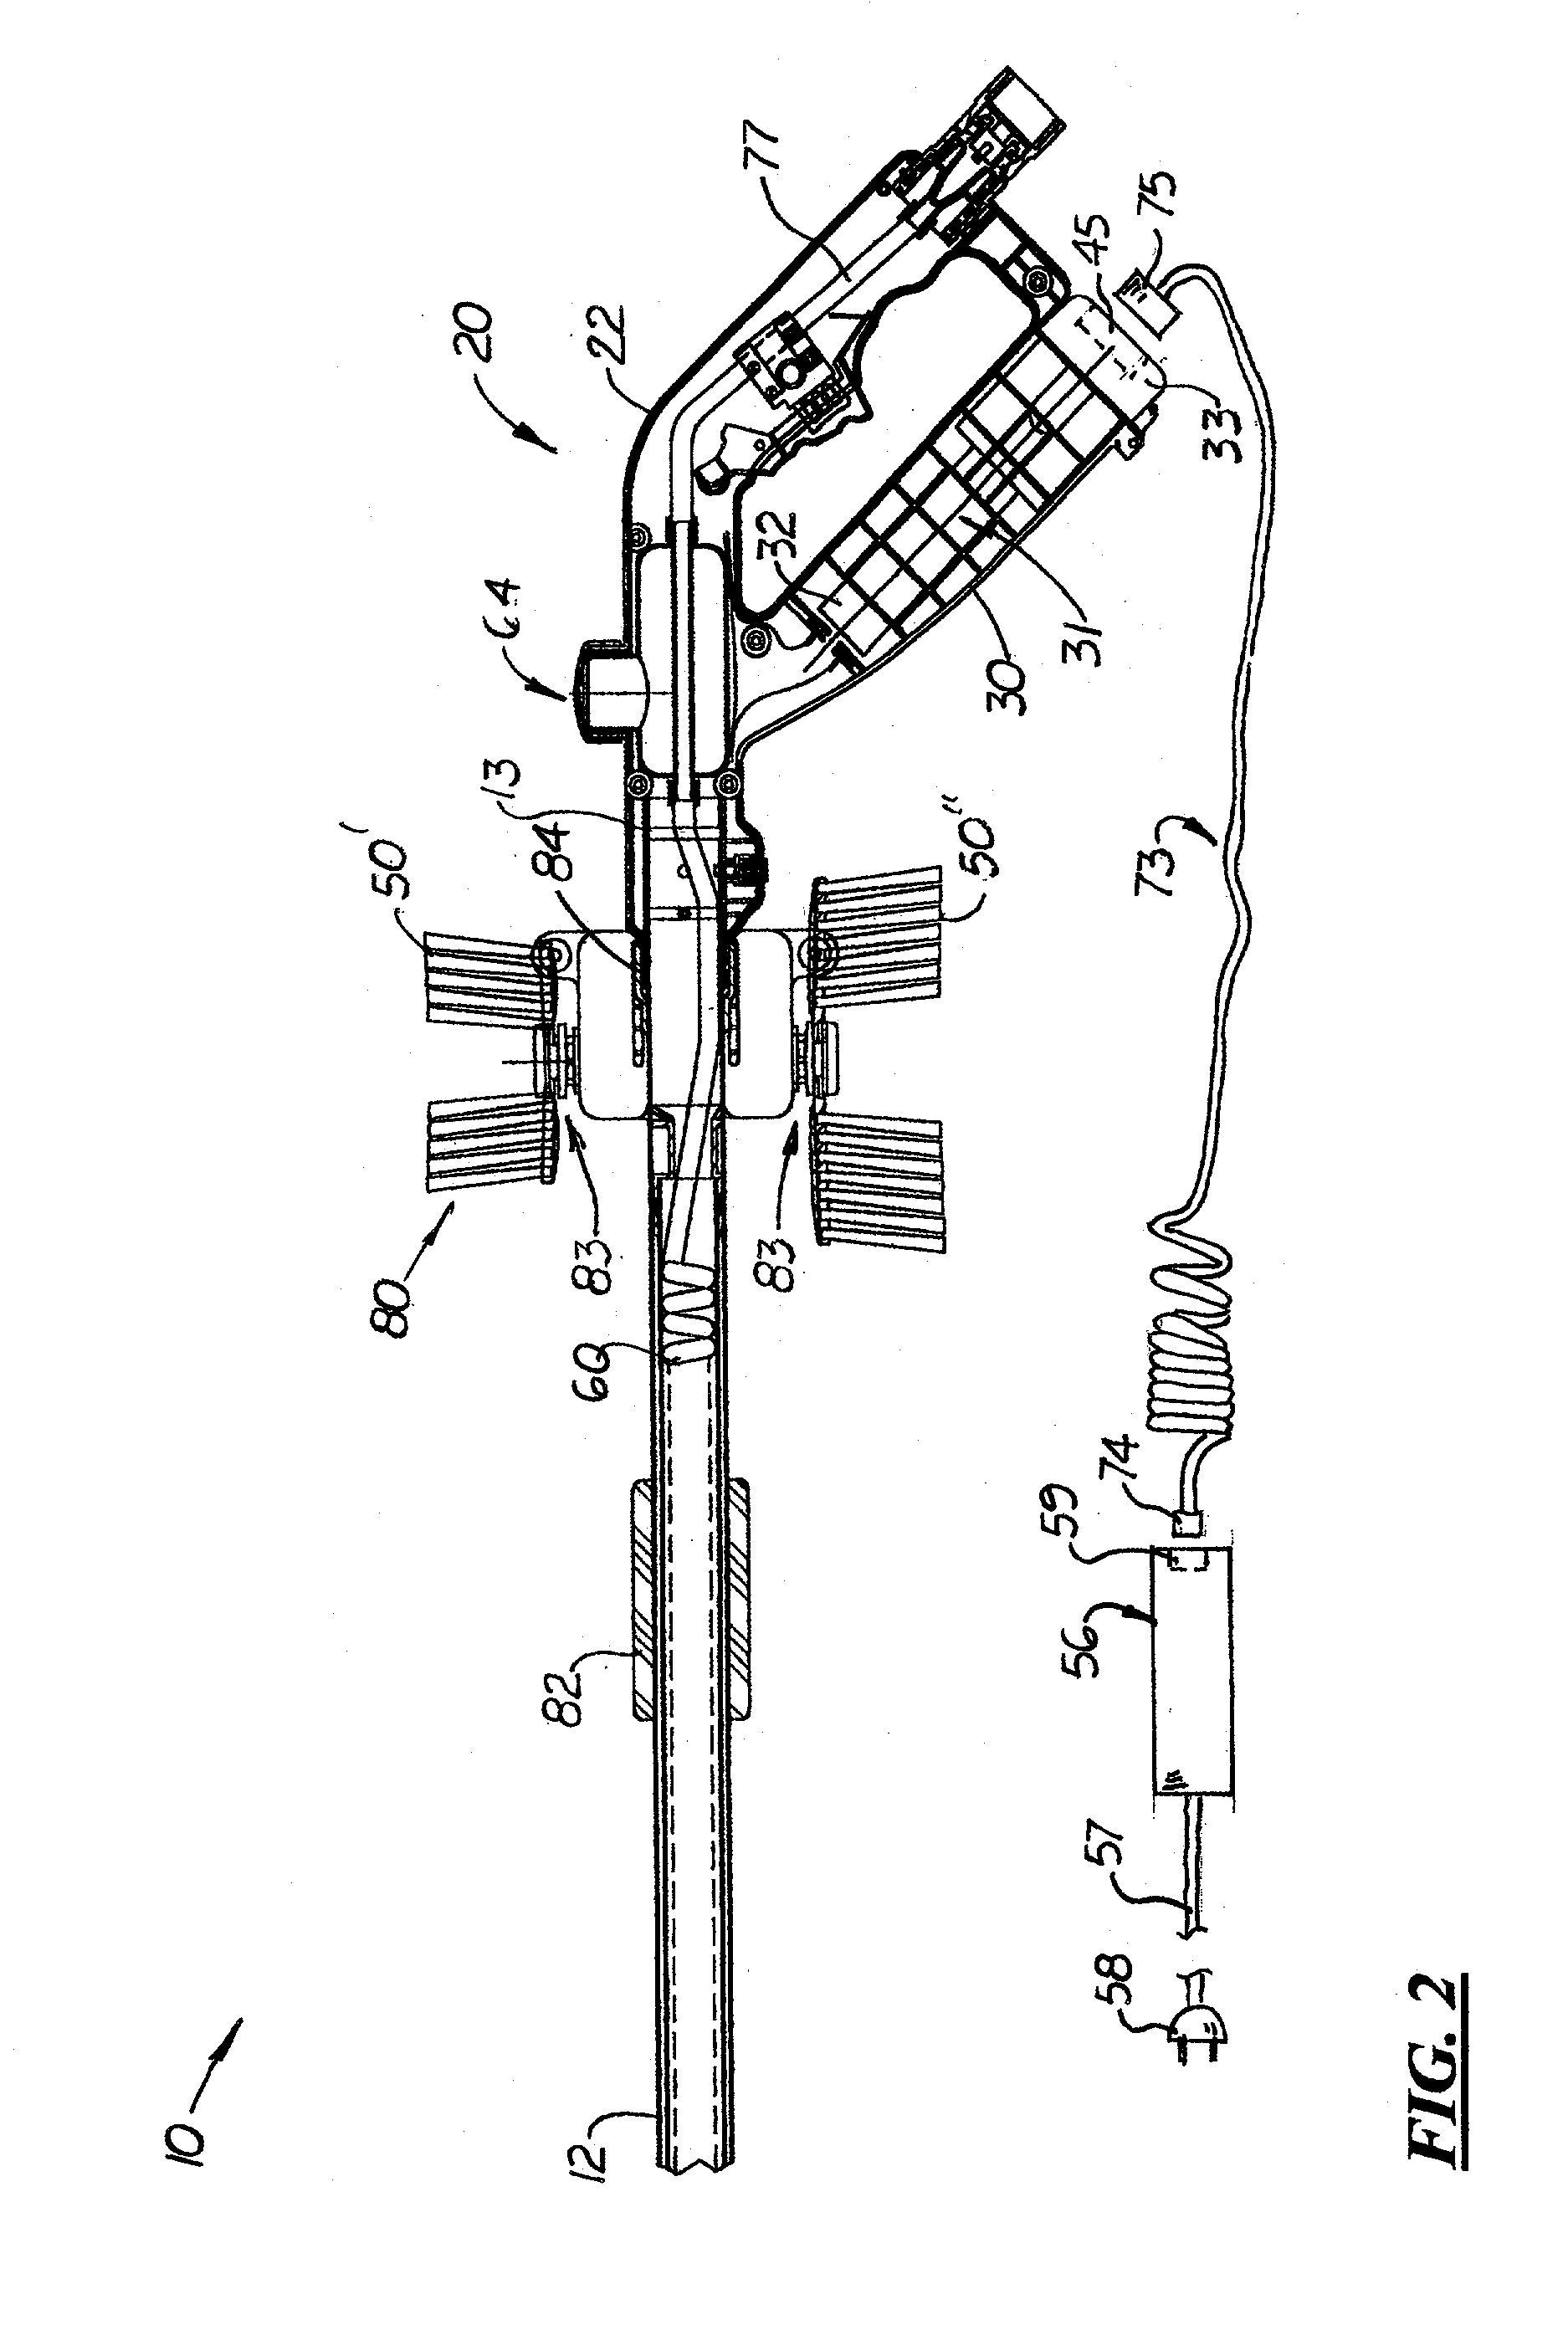 Hand held, electric cleaning device